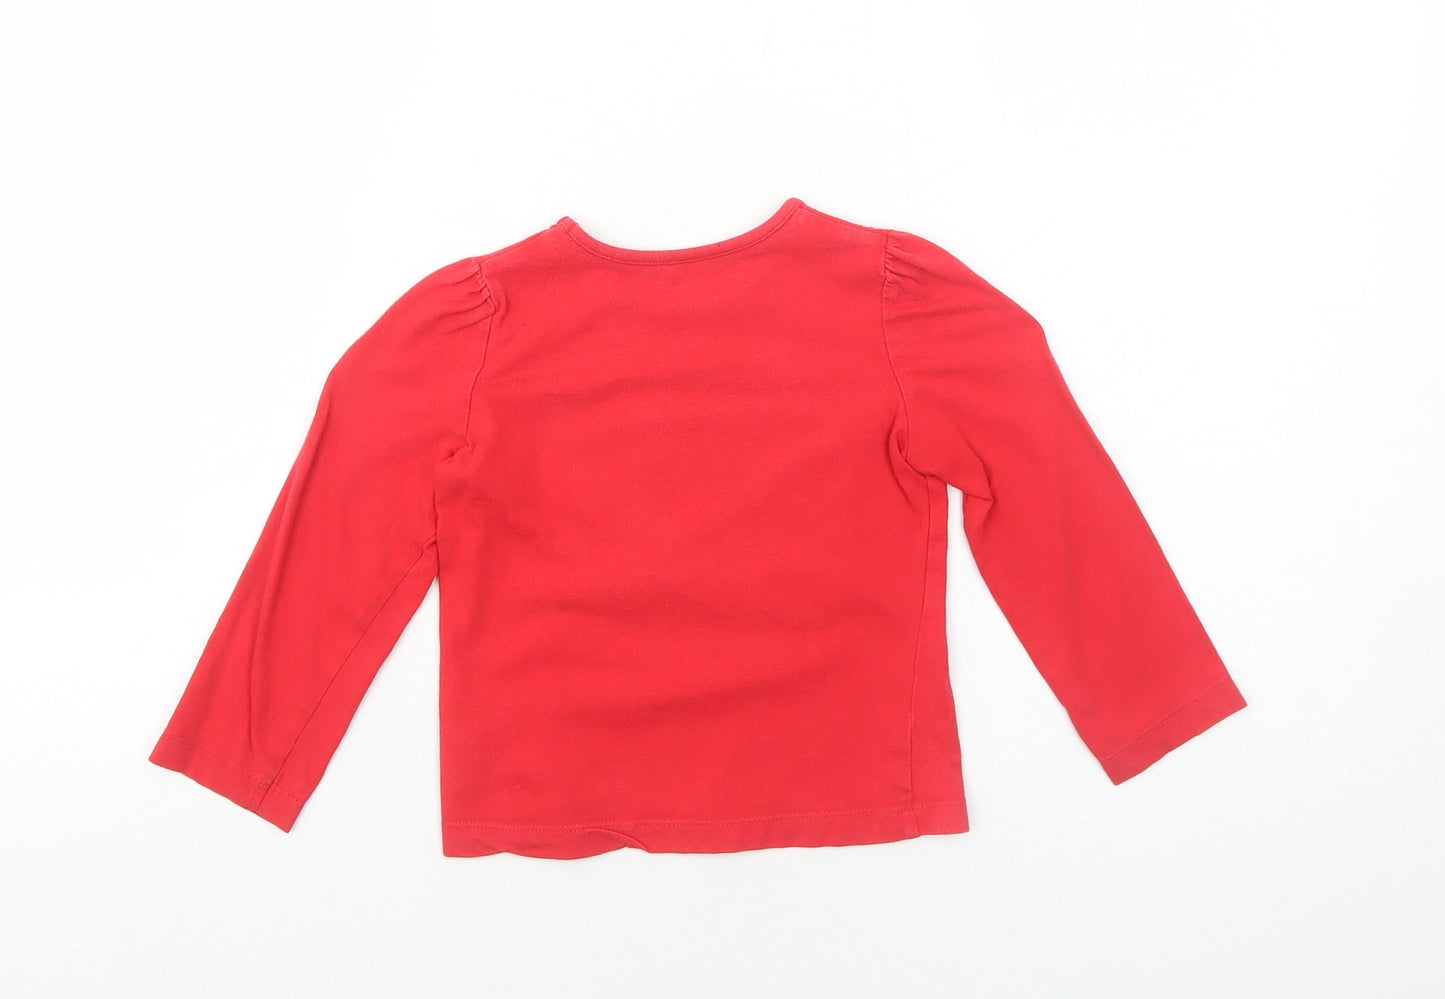 Mothercare Girls Red Cotton Basic T-Shirt Size 2-3 Years Round Neck Pullover - Bus